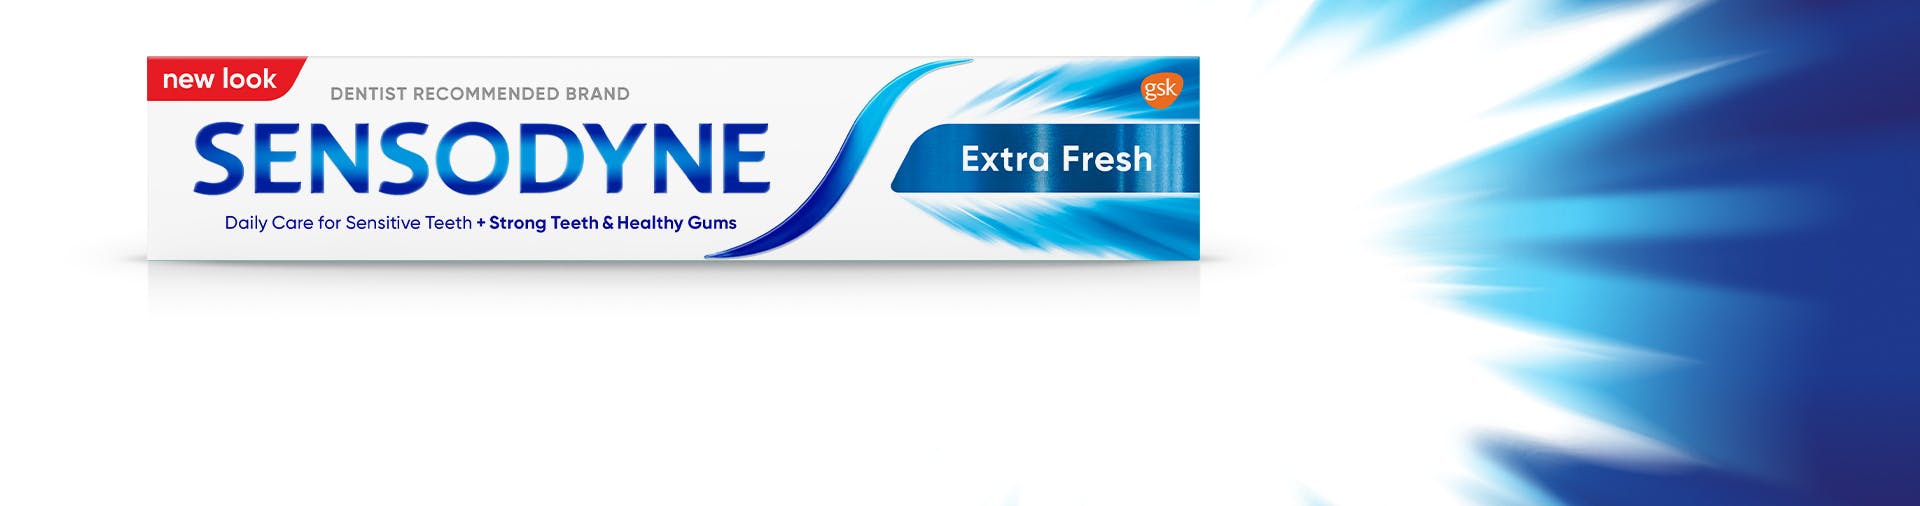 Sensitivity relief with long lasting fresh breath feeling imagery